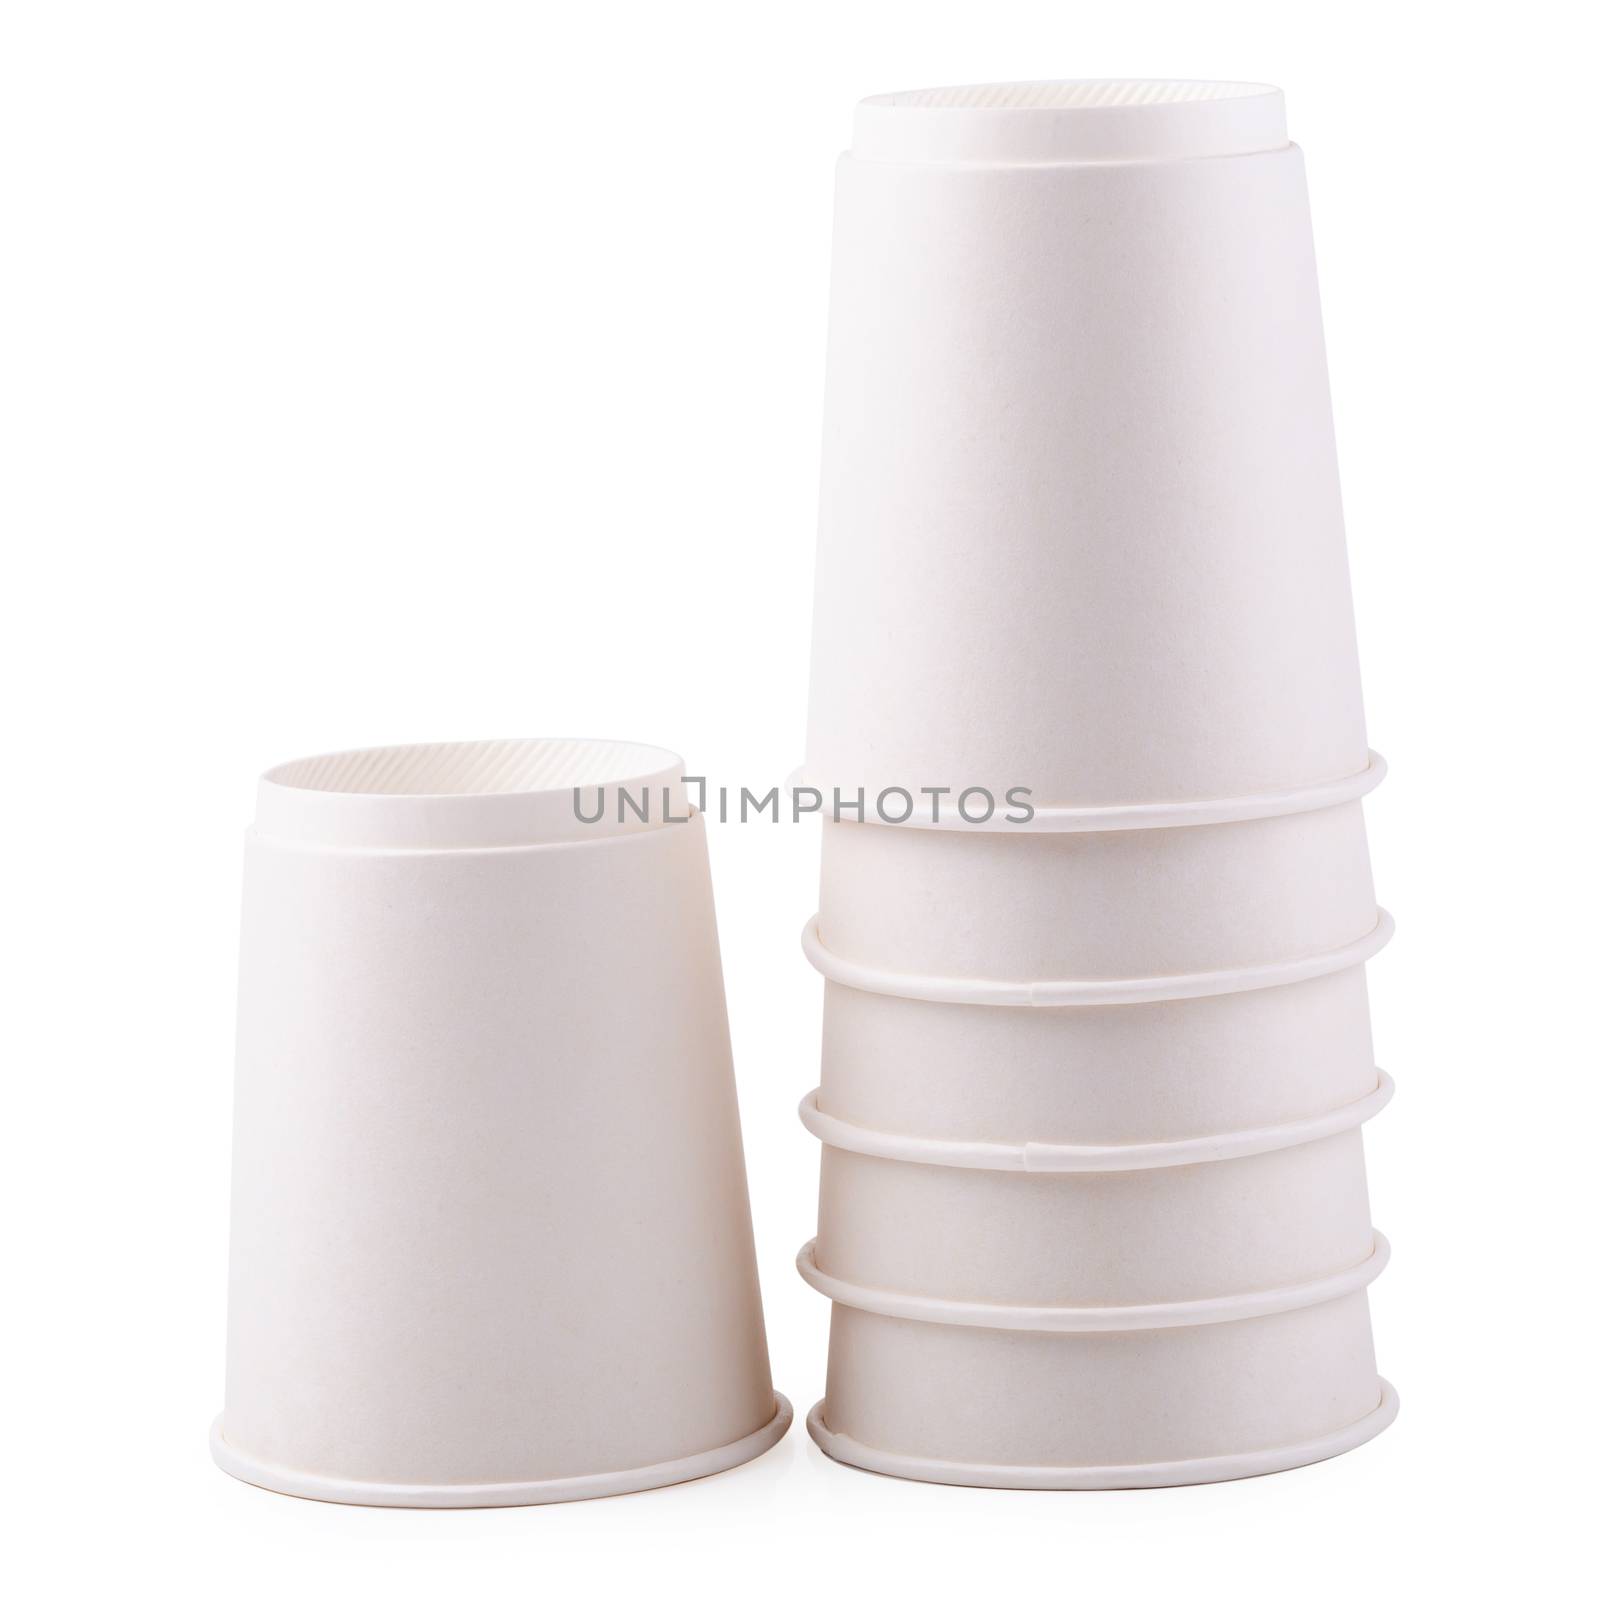 Takeaway White paper coffee cup isolated on a white background by kaiskynet